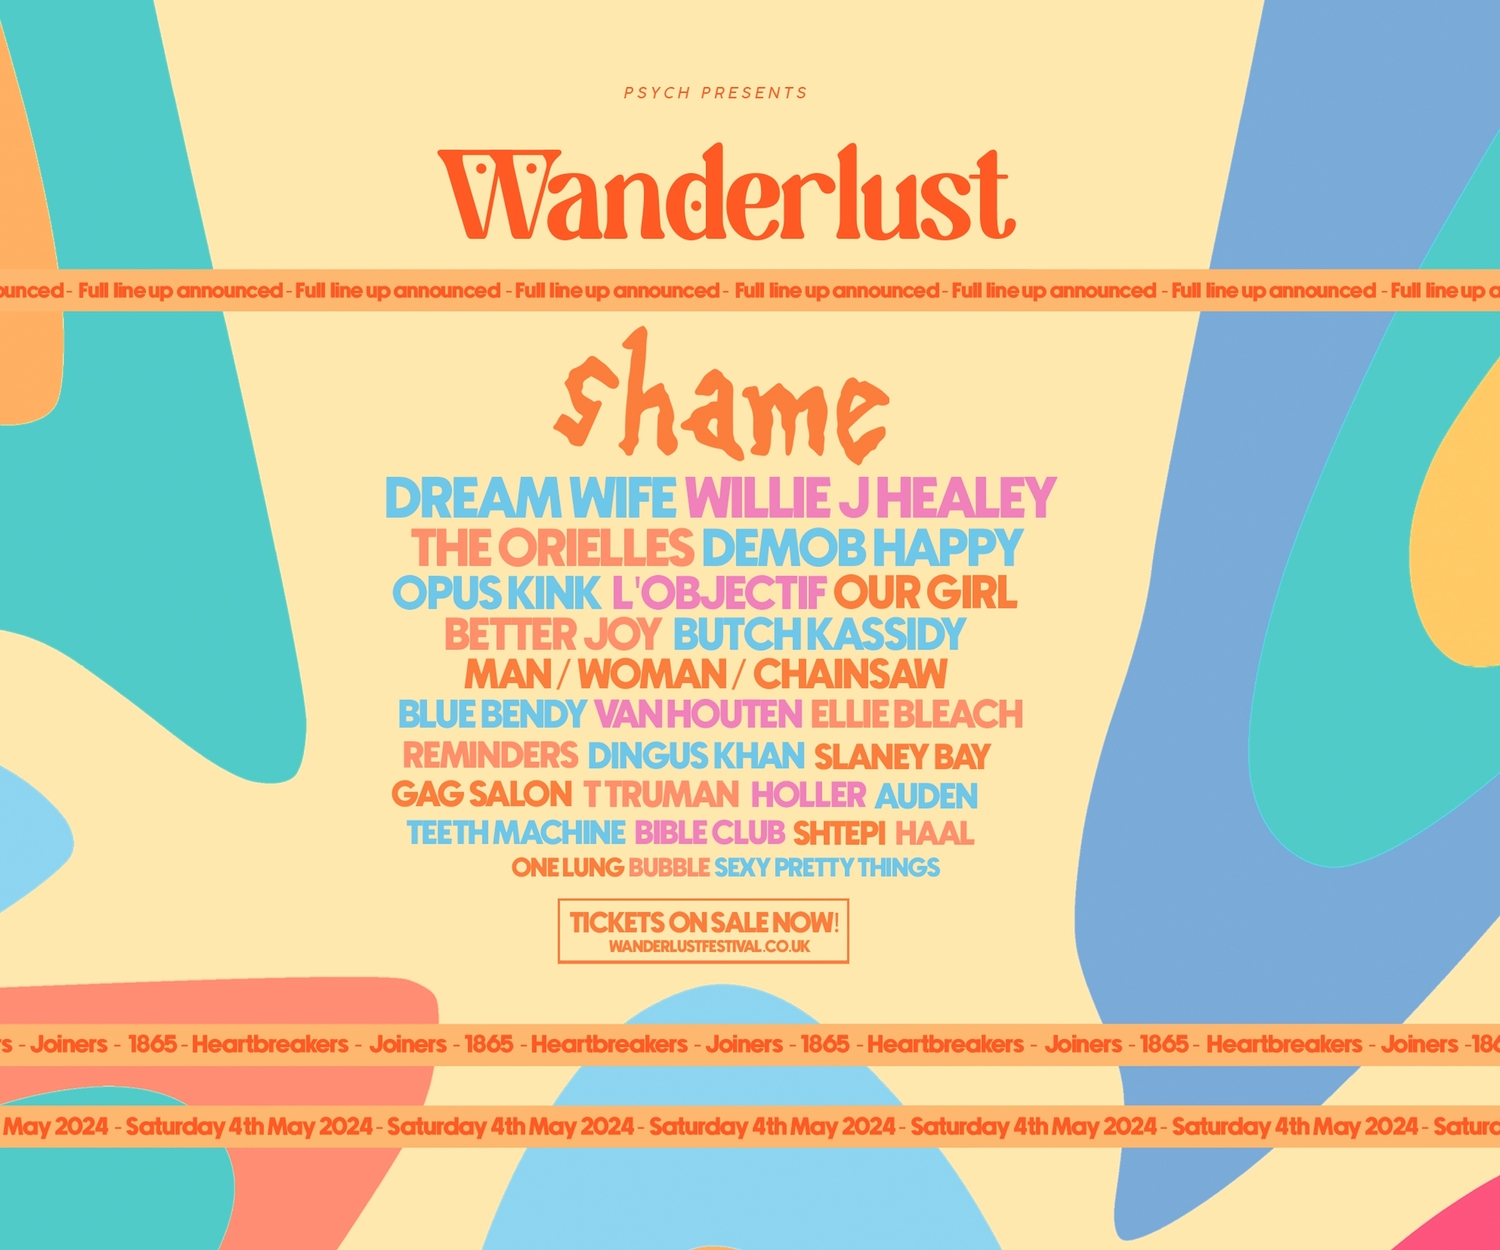 Southampton's Wanderlust Festival announce Shame, Dream Wife, Willie J Healey and more for 2024 lineup